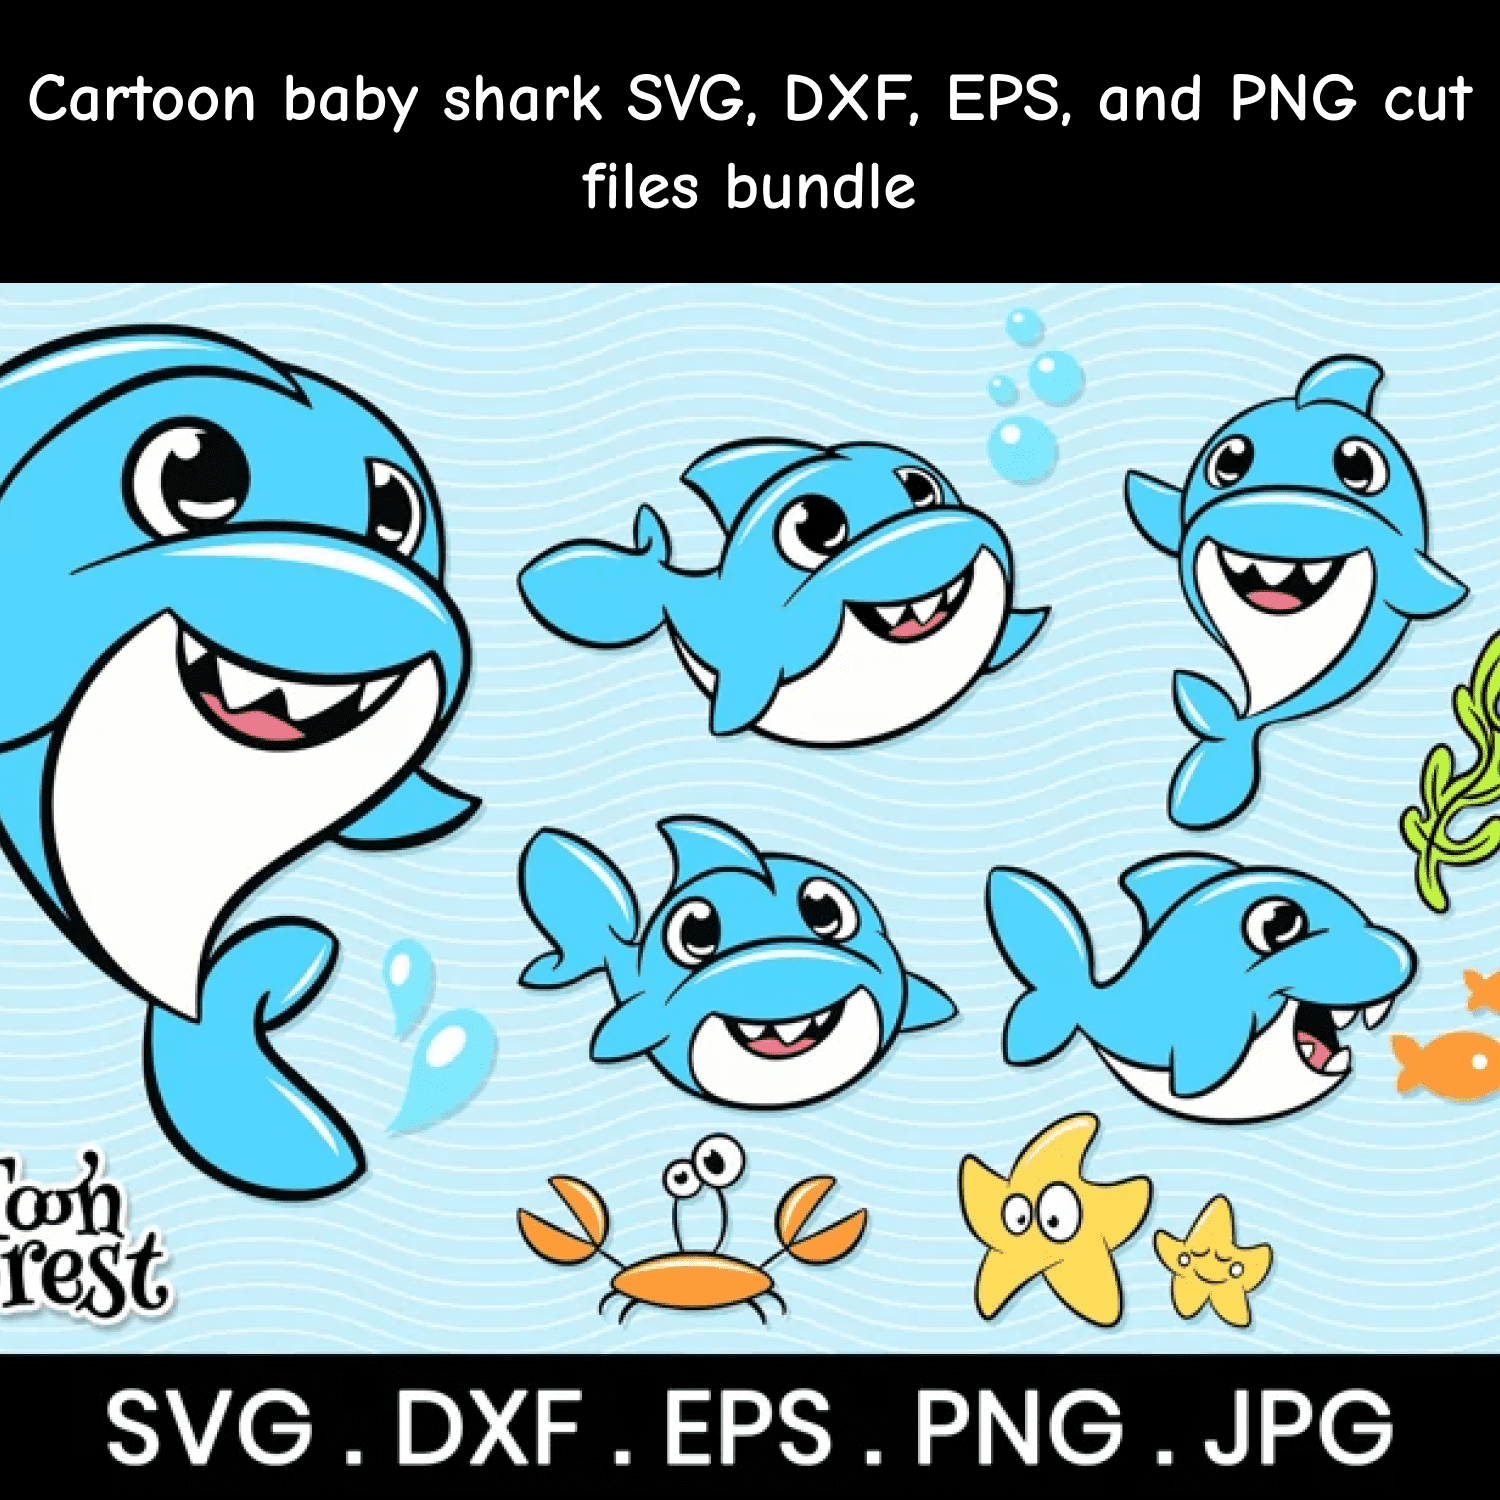 Cartoon baby shark SVG, DXF, EPS, and PNG cut files bundle.